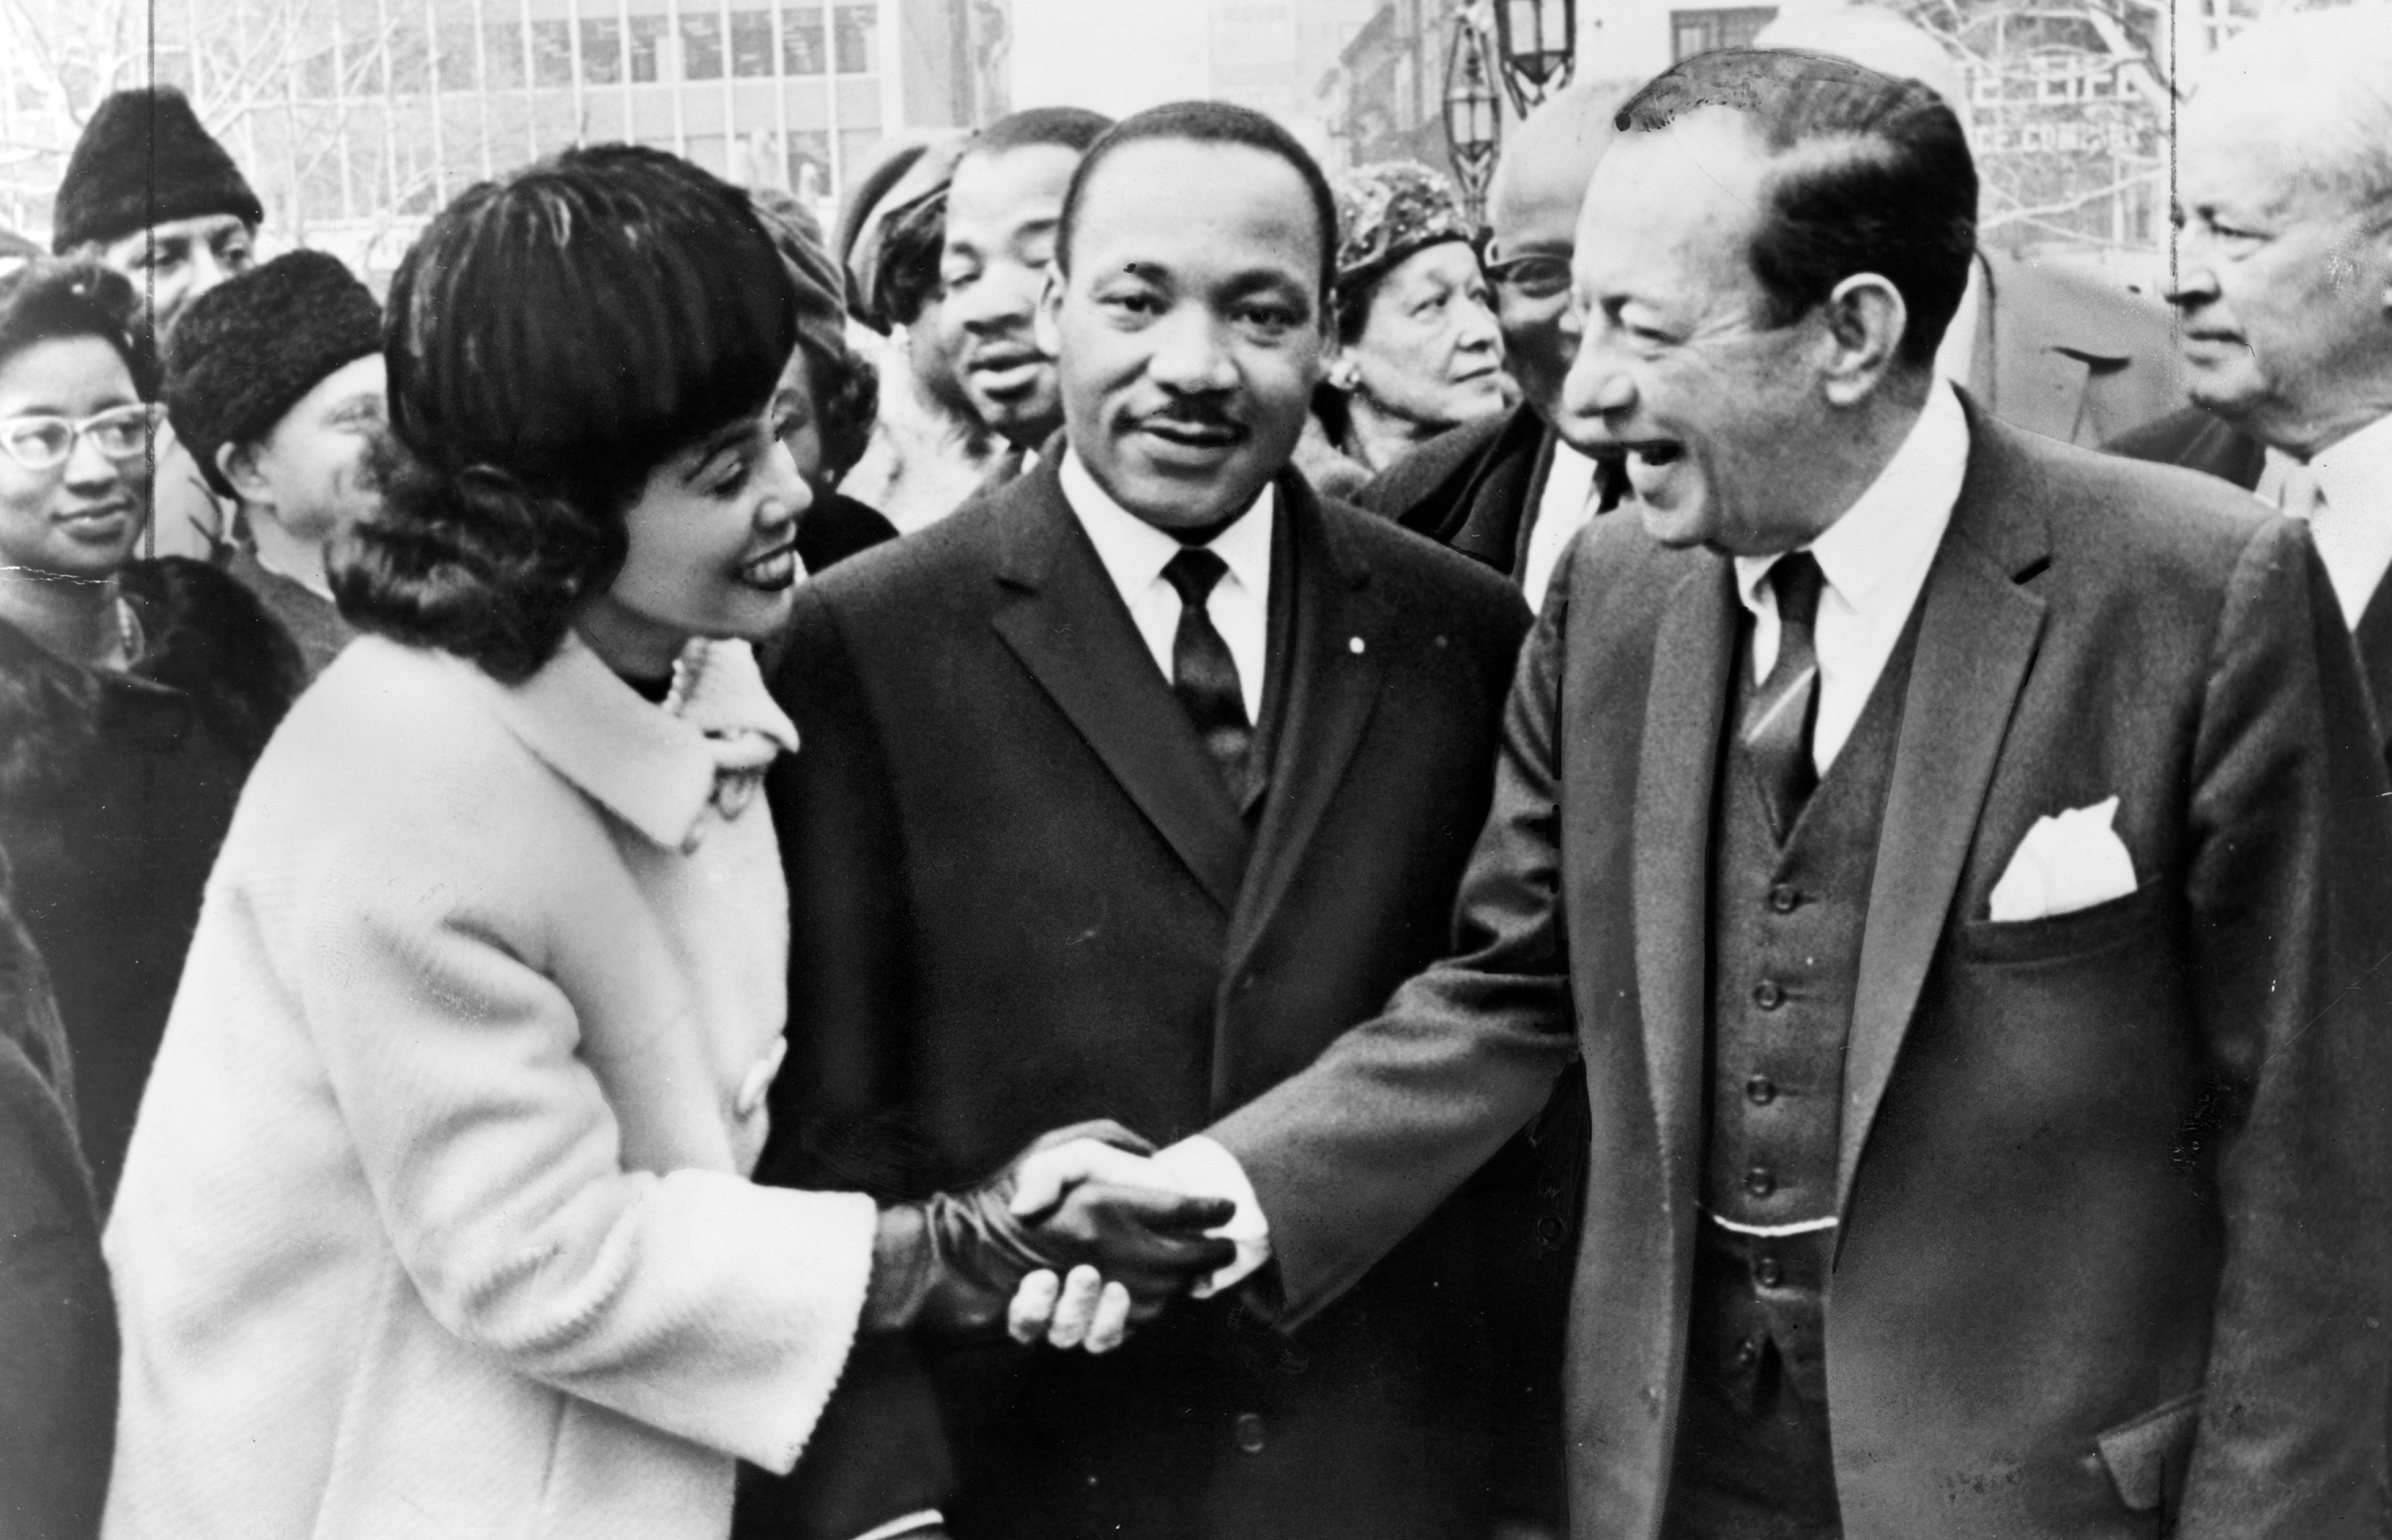 Mayor Wagner of New York greets Dr. and Mrs. Luther King, Jr. at City Hall. Robert Ferdinand Wagner II.